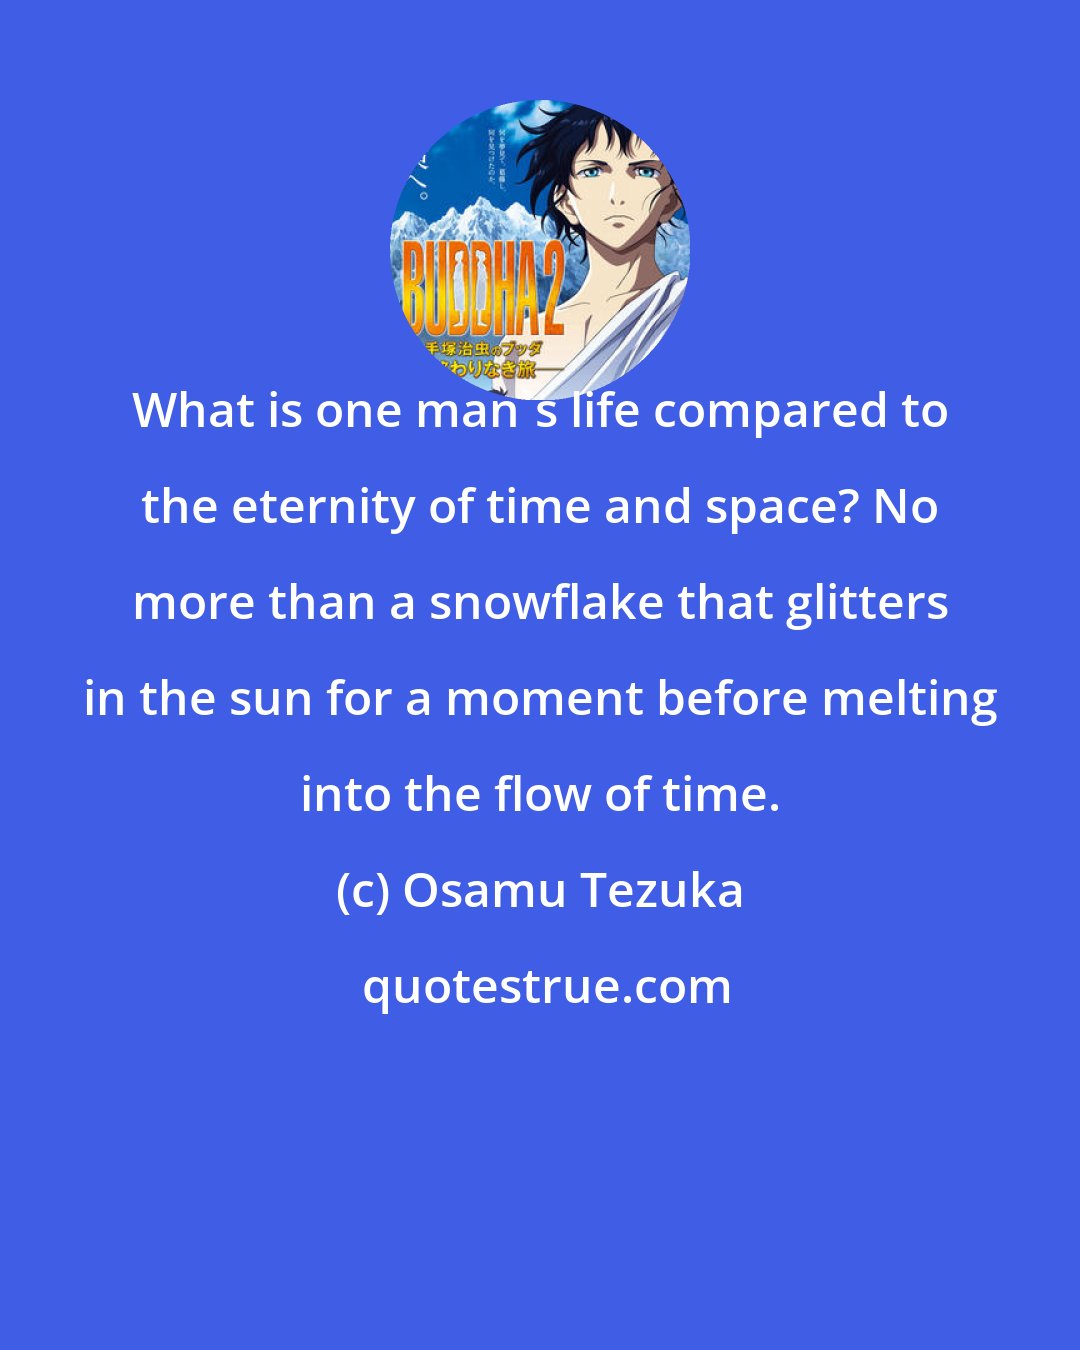 Osamu Tezuka: What is one man's life compared to the eternity of time and space? No more than a snowflake that glitters in the sun for a moment before melting into the flow of time.